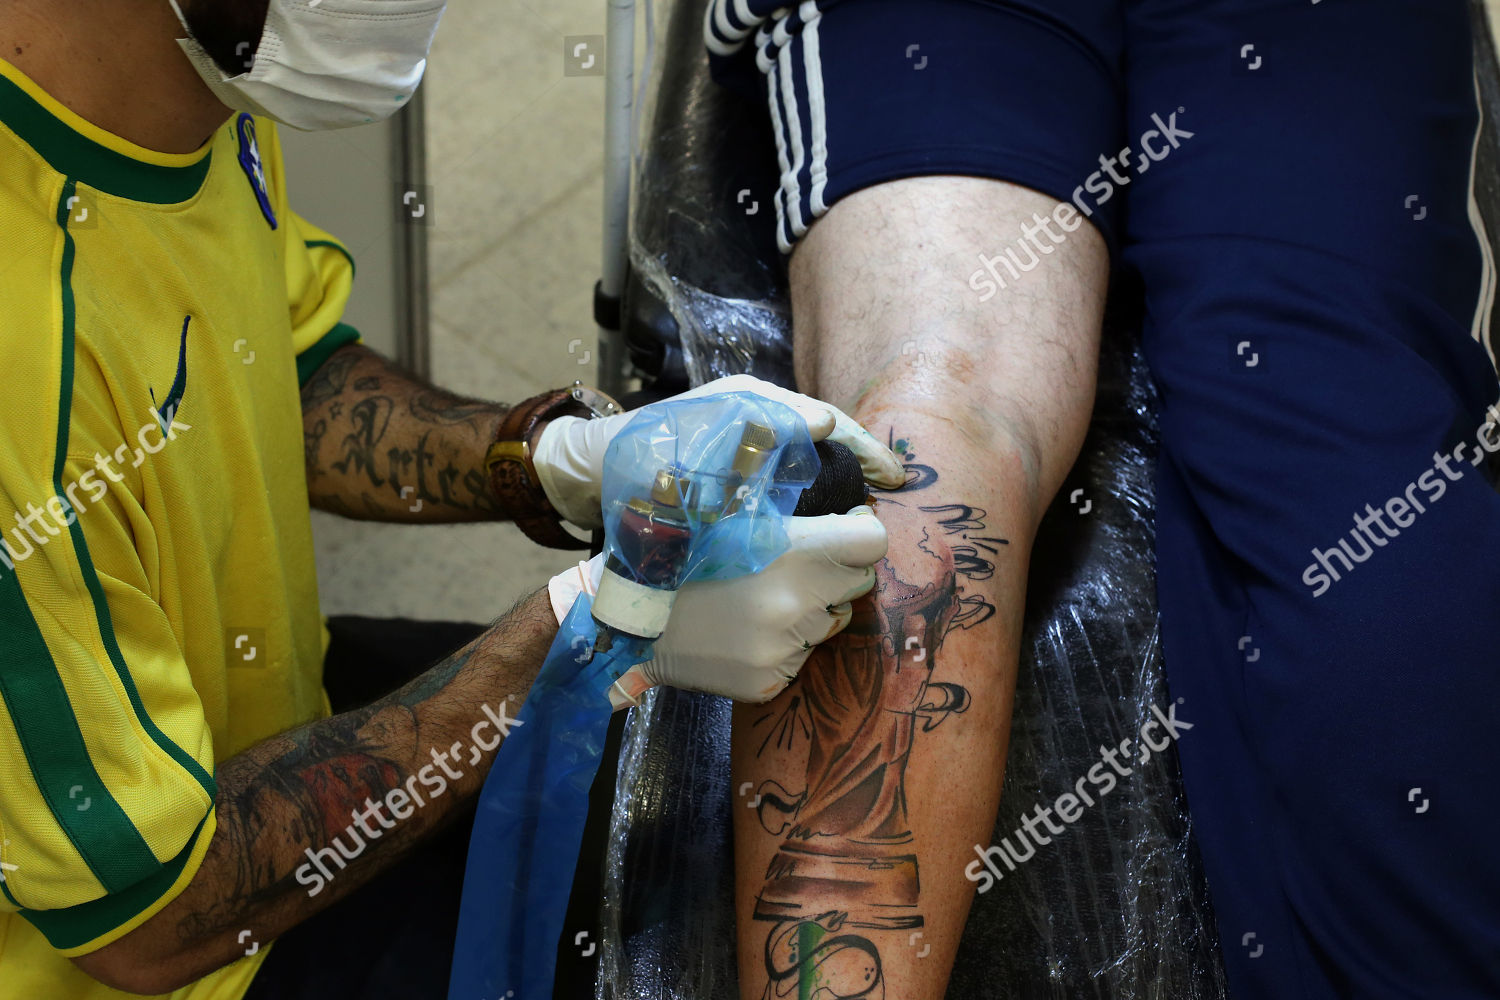 101 Great Goalscom  A series of Lionel Messi Copa America tattoos Some  of these are brilliant    Facebook  101 Great GoalscomLionel  MessiLionelAmericaMessiCopathese